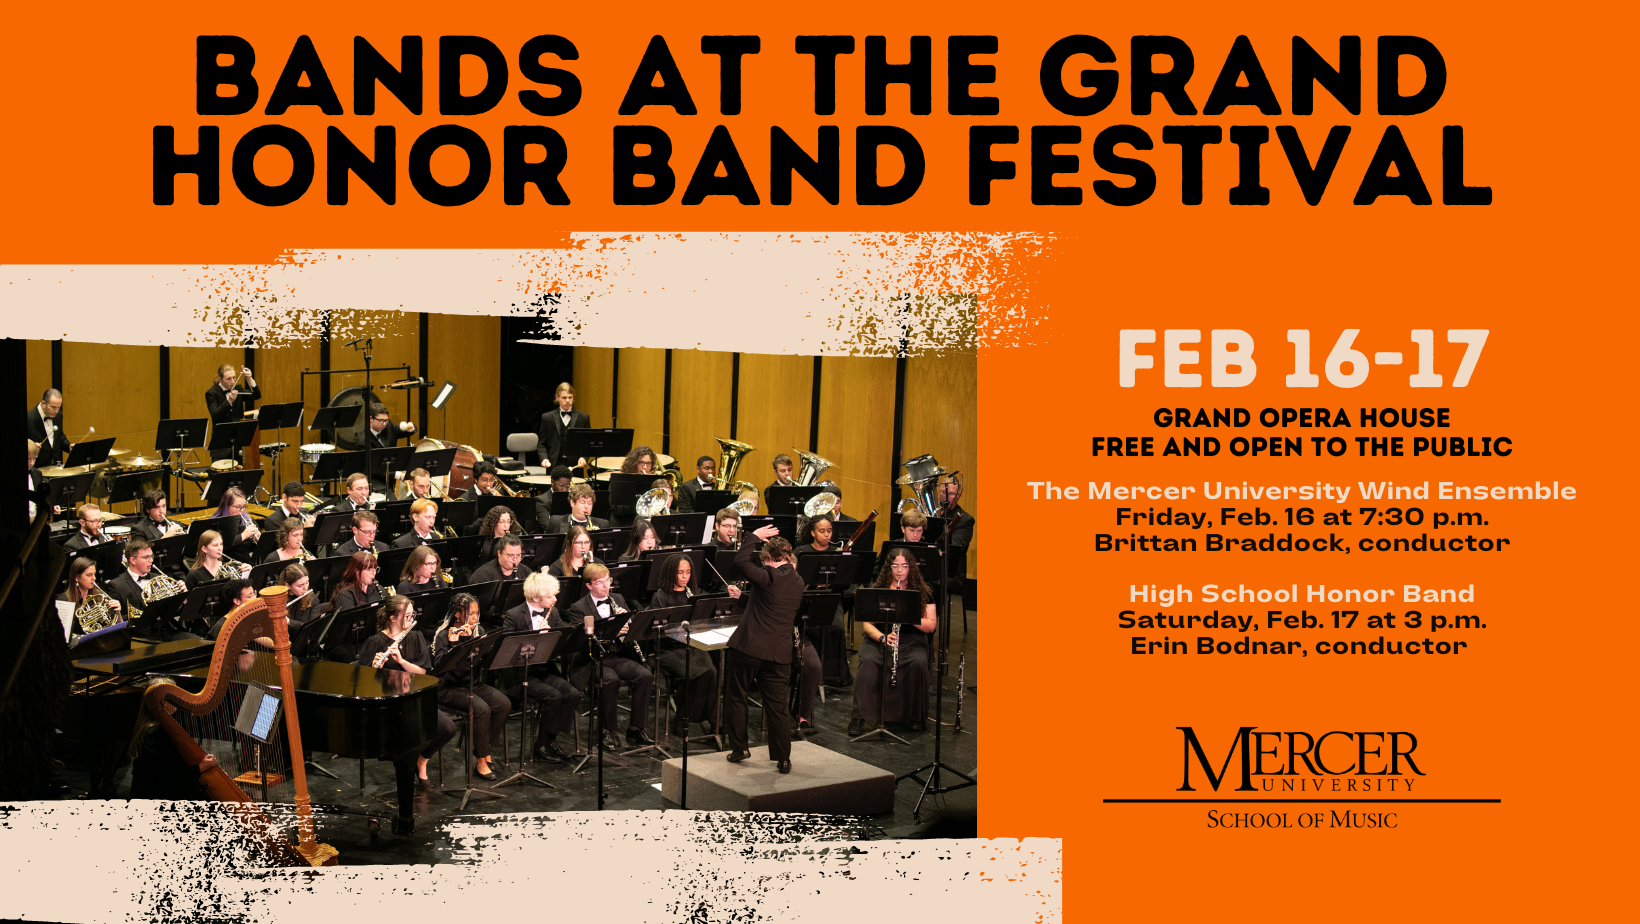 Bands at The Grand Honor Band Festival